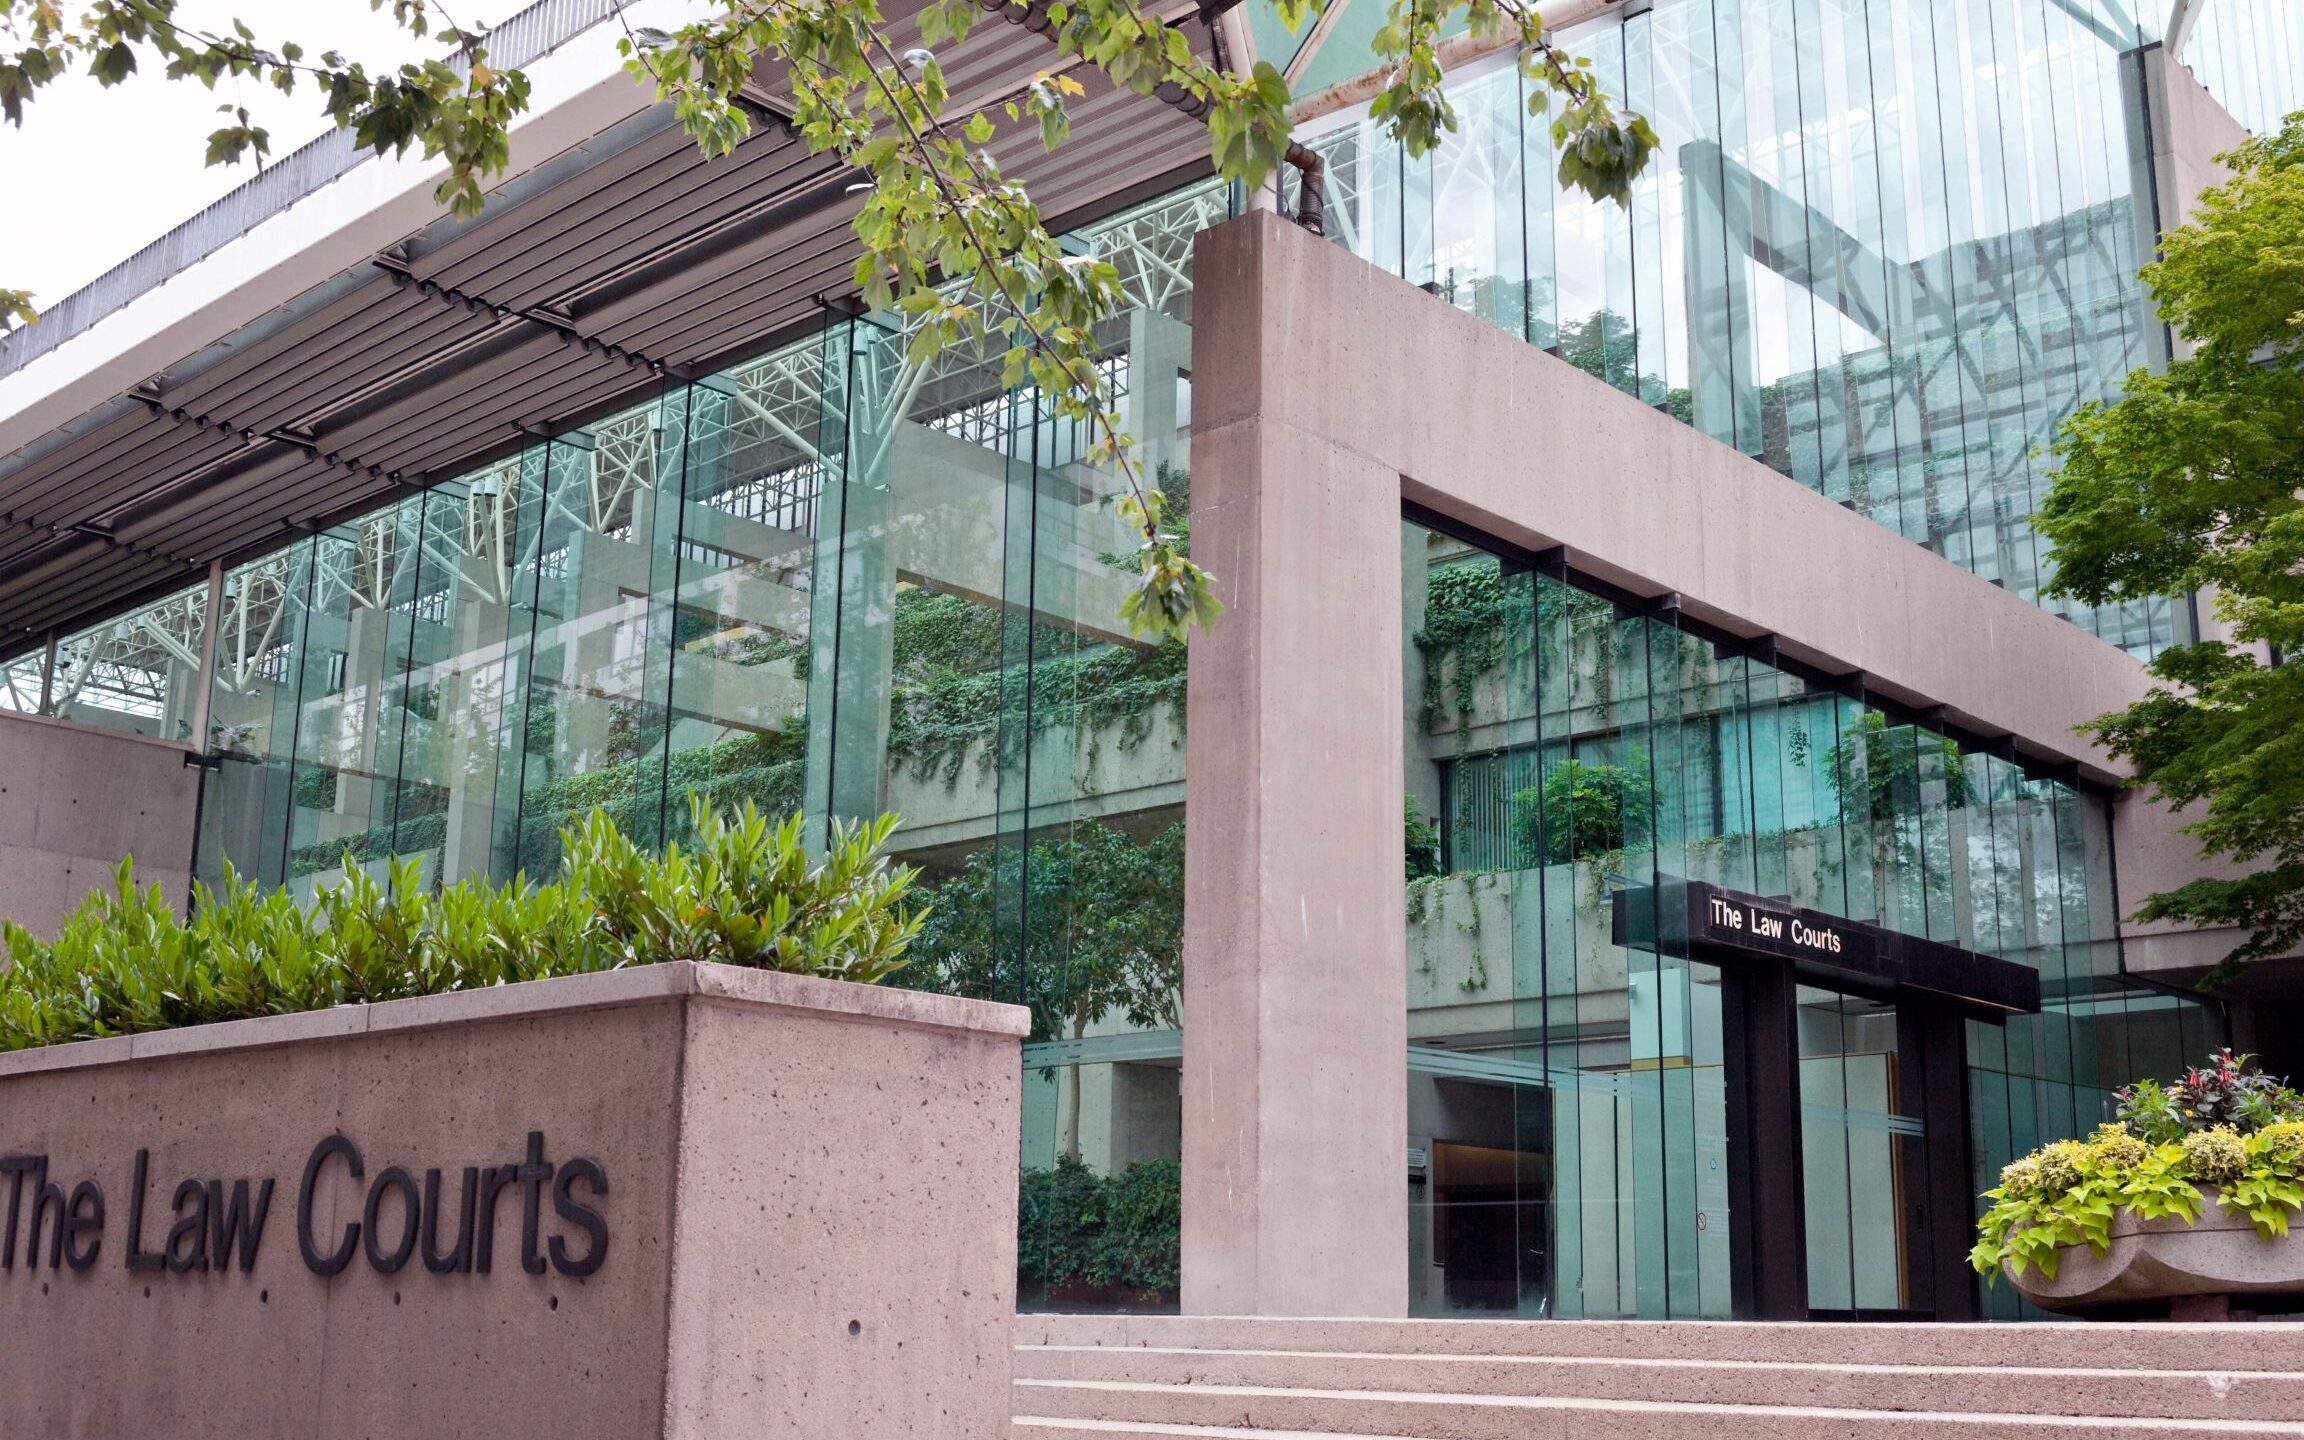 Image of the entrance of the Provincial Law Courts in Vancouver, BC.